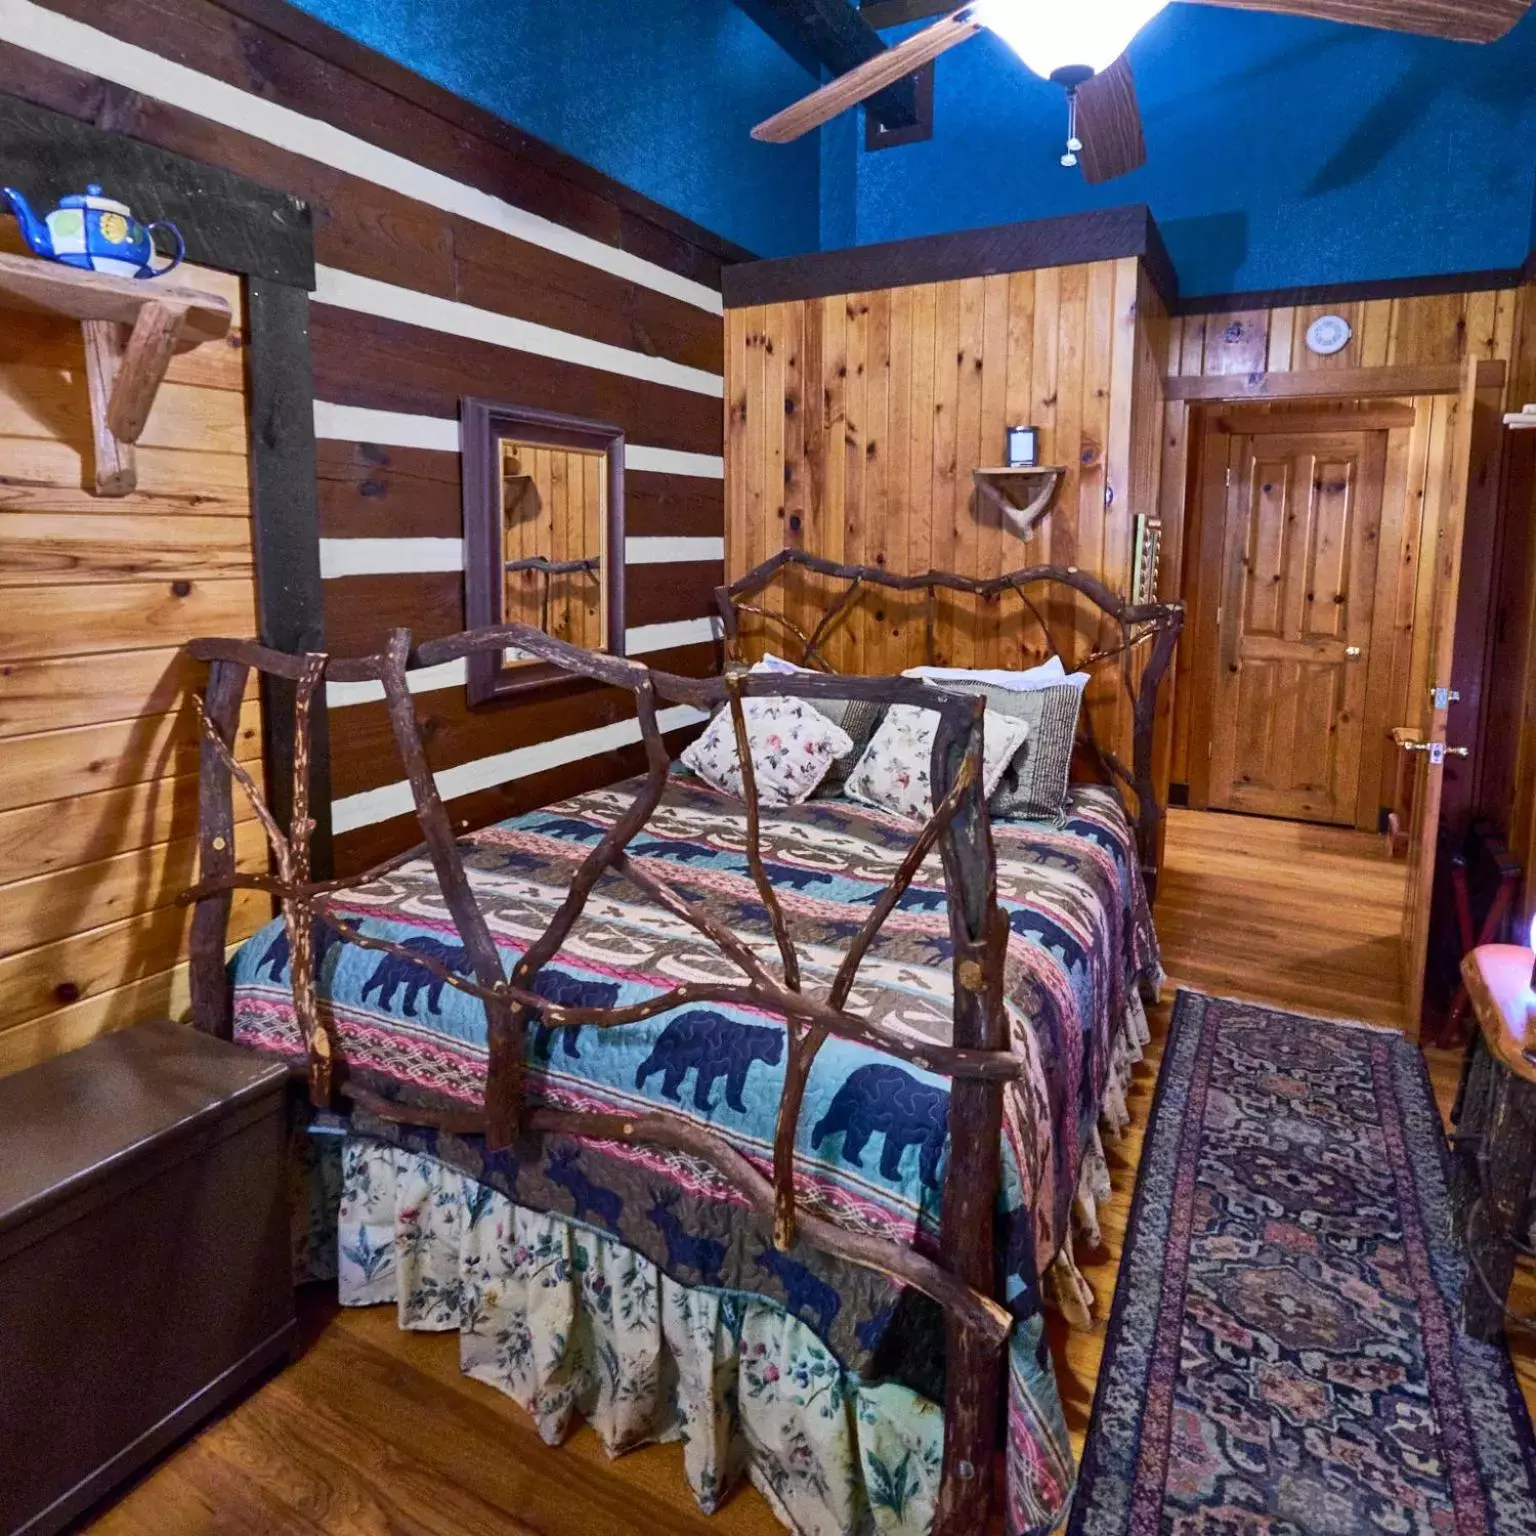 Bunk Bed in Creekwalk Inn Bed and Breakfast with Cabins